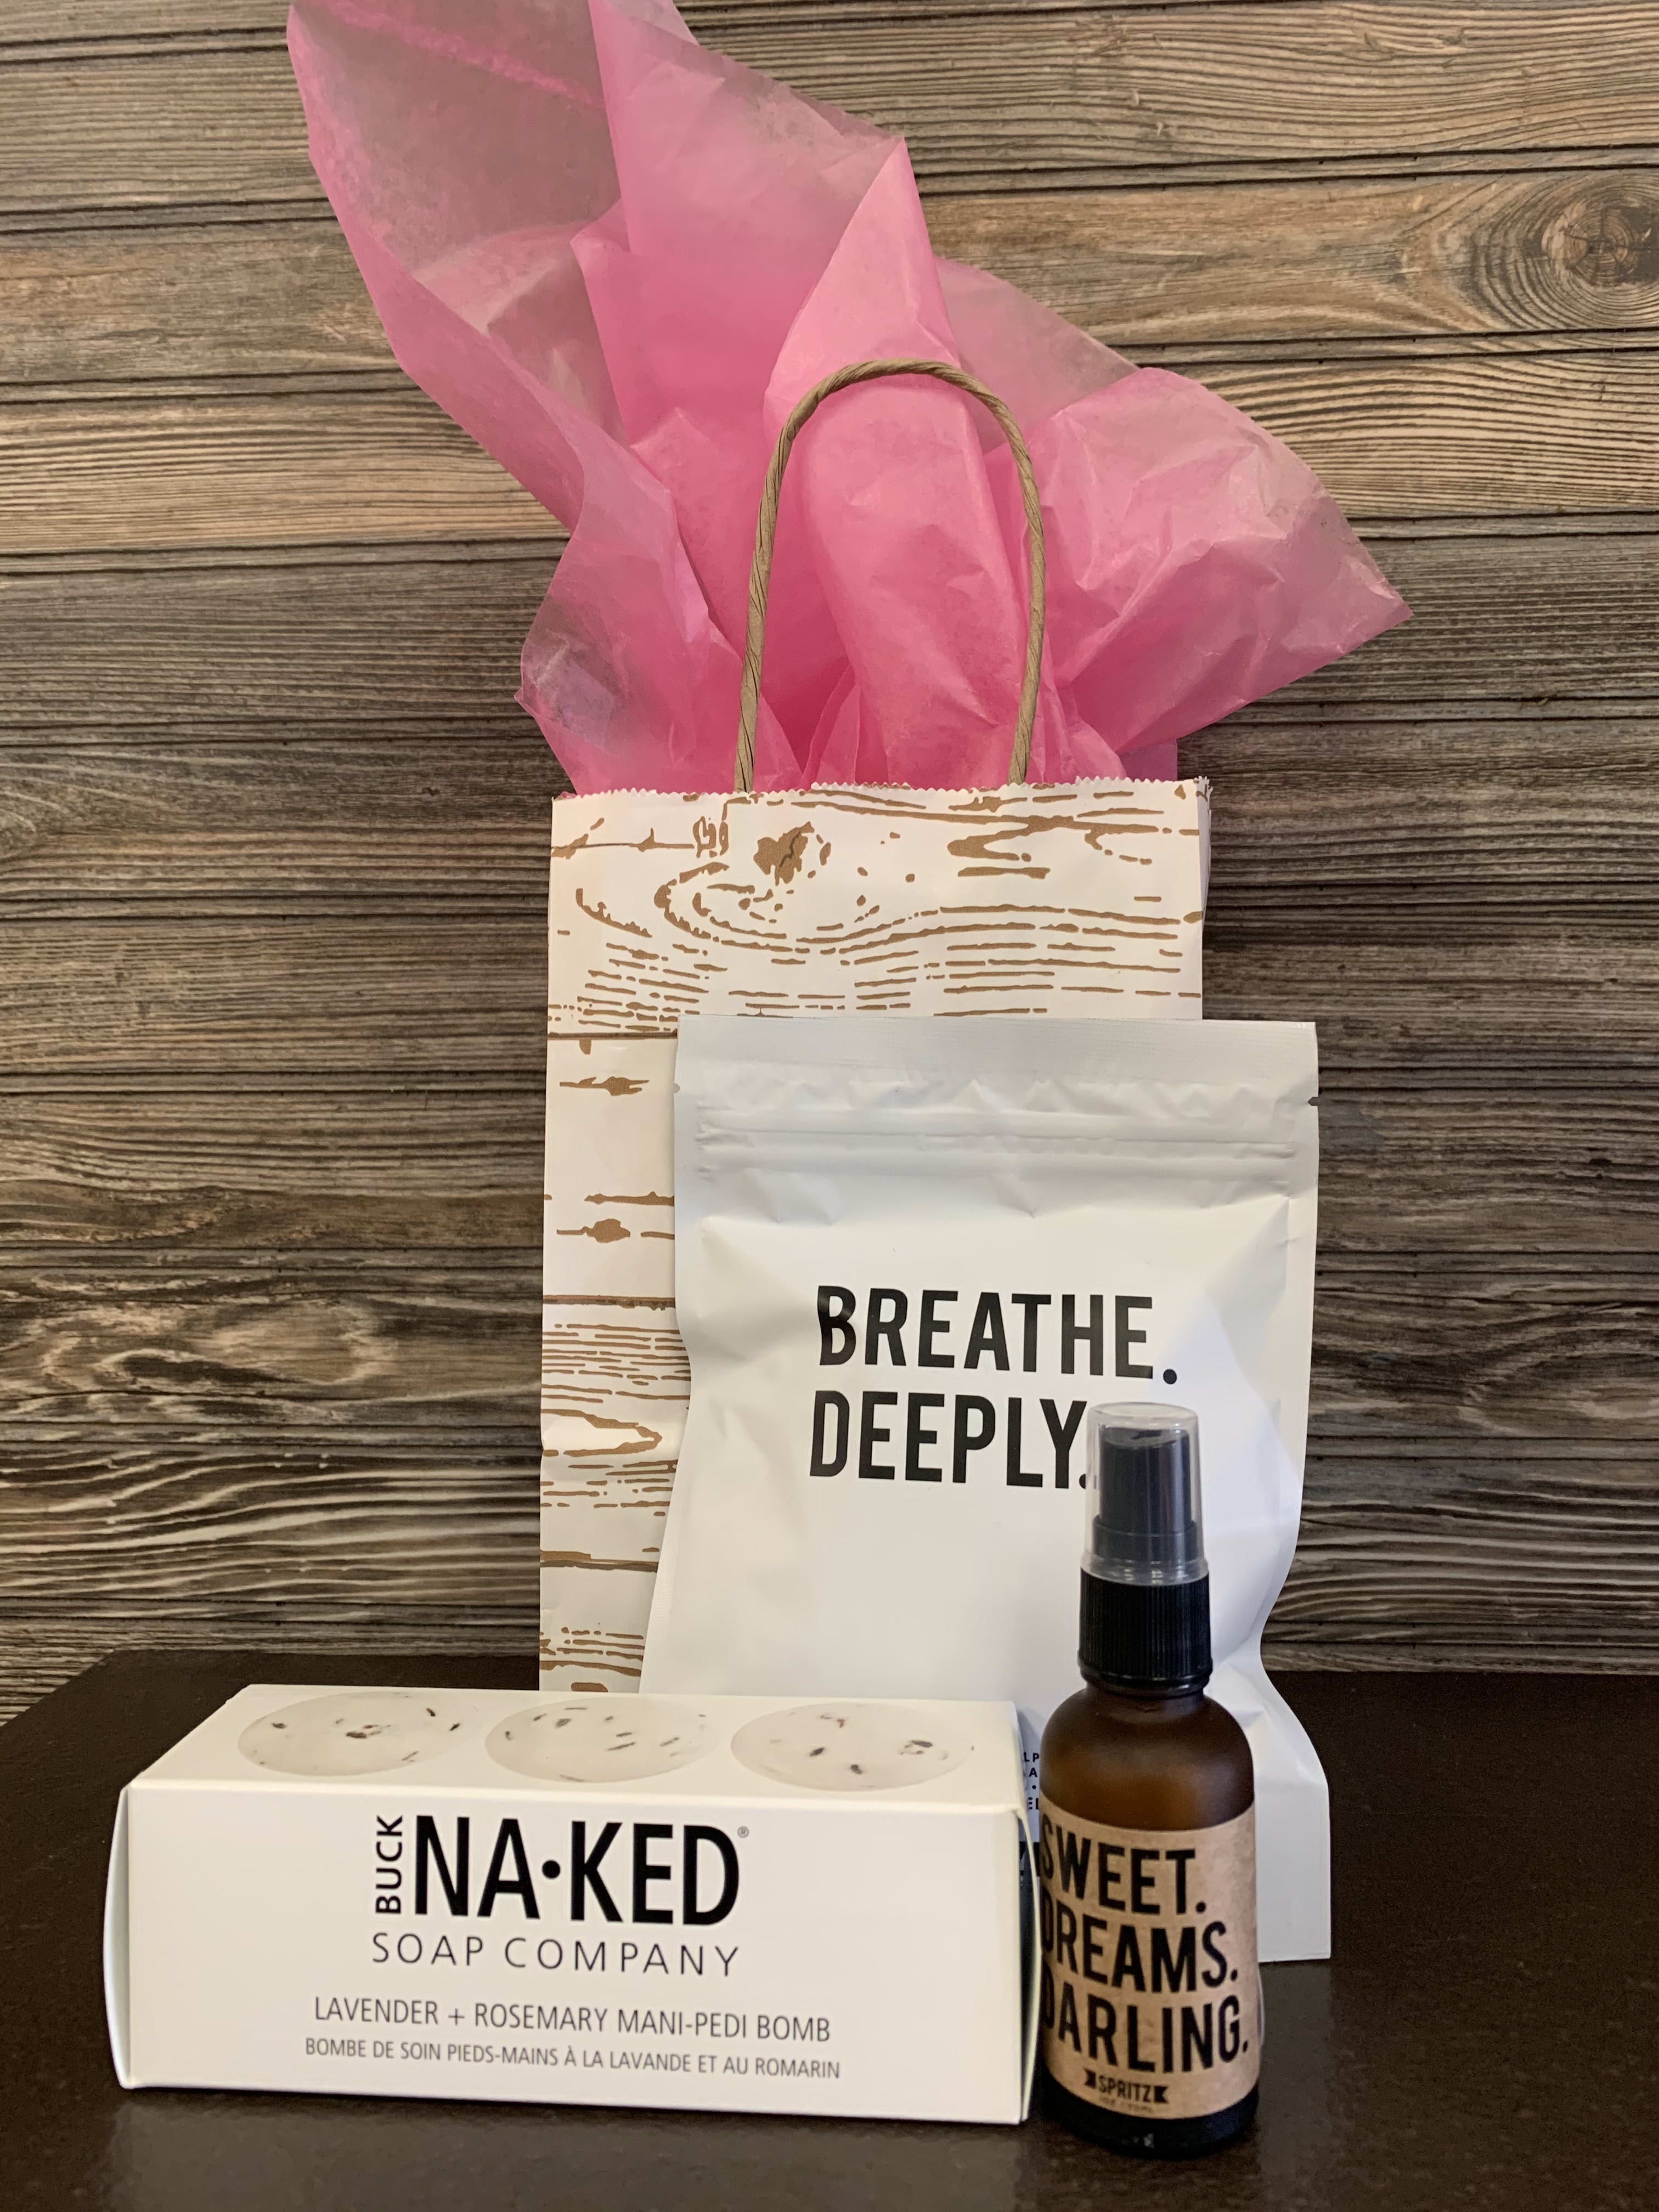 Relax + Breathe Deeply Gift bag  - Breathe Deeply Gift Bag includes 1 Buck Naked Mani/Pedi Bomb, Happy Spritz Sweet Dreams Darling Spray, and Breathe Deeply essential oil wipes in a whitewashed paper bag with tissue and shredded paper.  *Buck Naked's Mani/Pedi Bombs are the perfect way to naturally treat your tender tootsies and fingers, prepping them for the perfect mani or pedi! Each set of 3 bombs is made with their traditional all-natural and vegan formula to maximize moisture and softness. Bath bombs individually shrink-wrapped in biodegradable film. The box is Carbon Neutral and Recyclable. Ingredients: Sodium Bicarbonate, Citric Acid, Sodium chloride (Sea Salt), Magnesium Sulphate, Lavandula Angustifolia (Lavender) Flower, Carthamus Tinctorius (safflower) oil, Aqua, Parfum (Essential Oil) *Sweet Dreams Spray 10oz, Essential Oil Calming Lavender Bland, Facial, pillows before bed, relaxing, soothing, comforting, balancing, grounding. Ingredients are water, Lavender, vanilla, camomile, and other 100% essential oils  *Breath Deeply Essential Oil Towelettes: 7 individually wrapped Peppermint + Eucalyptus towelettes, meant for invigorating, cooling, soothing, &amp; stimulating. Ingredients: water, polysorbate 20, eucalyptus oil, organic peppermint oil, organic tree tea oil, organic lemon oil, honeysuckle flower extract, leuconostoc radish root ferment filtrate,  citric acid. 